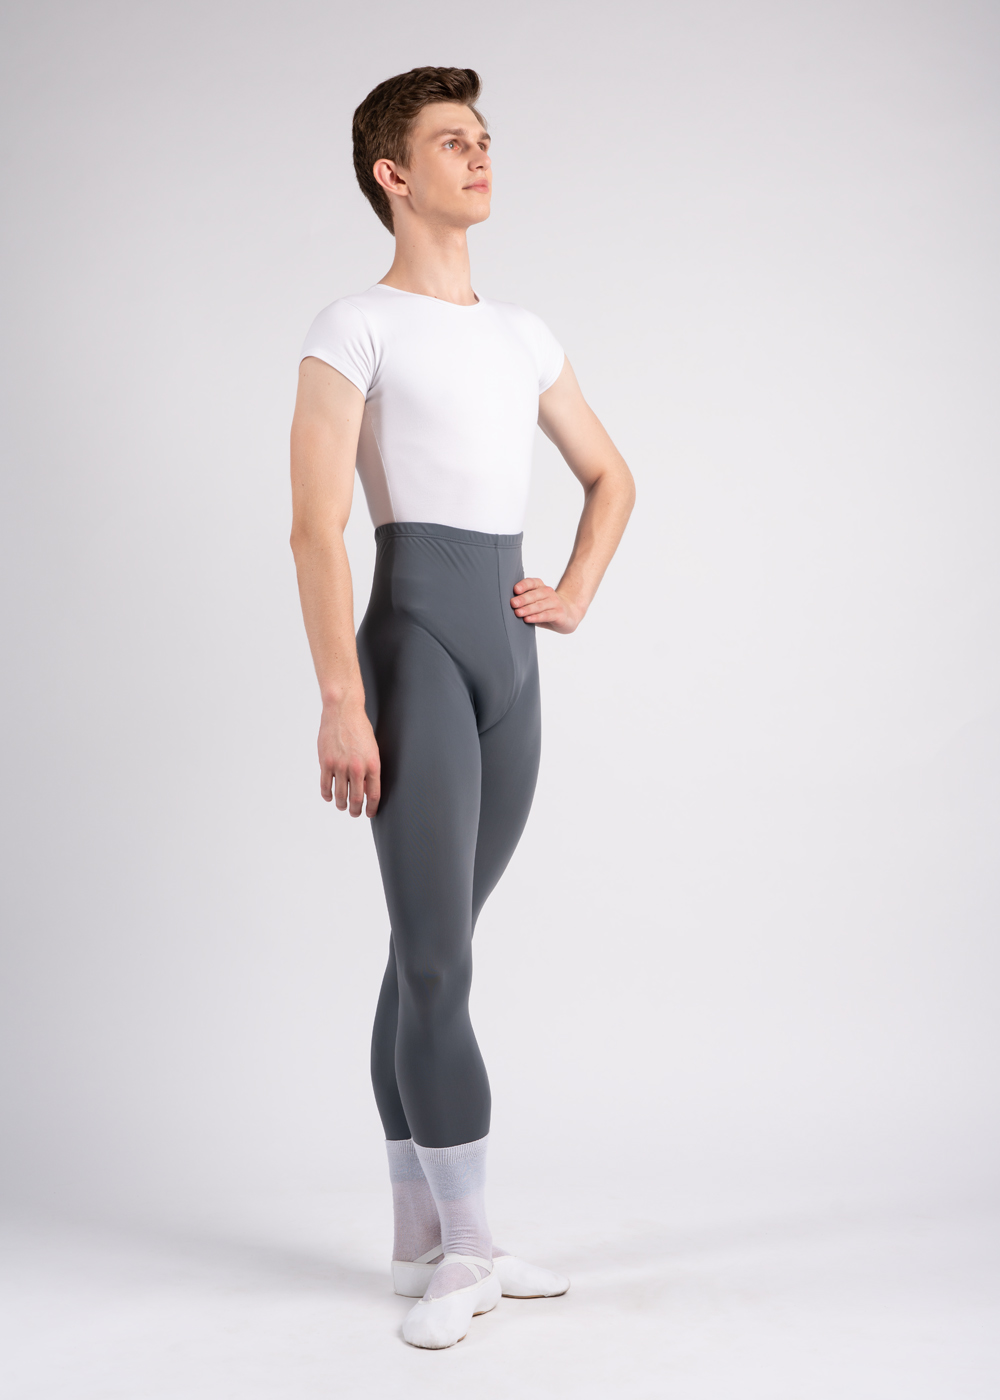 CALEB, Leggings (DA1497MN)  Nikolay® - official online shop of pointe  shoes and dance apparel in the USA